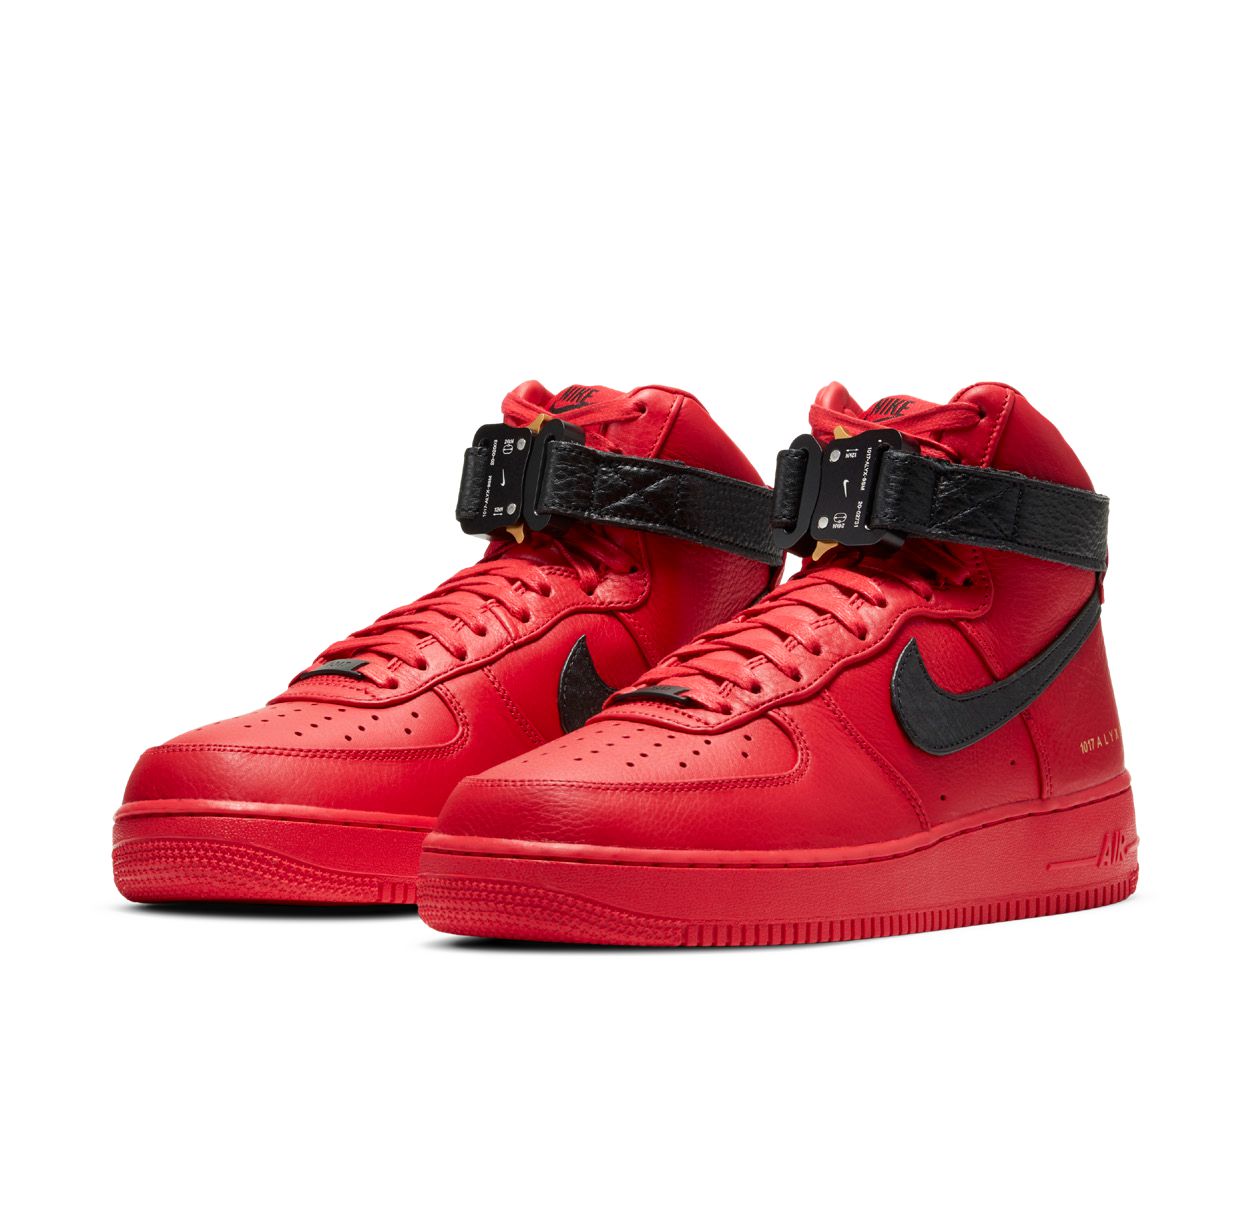 ALYX is Raffling Two “University Red” Air Force 1 Colourways